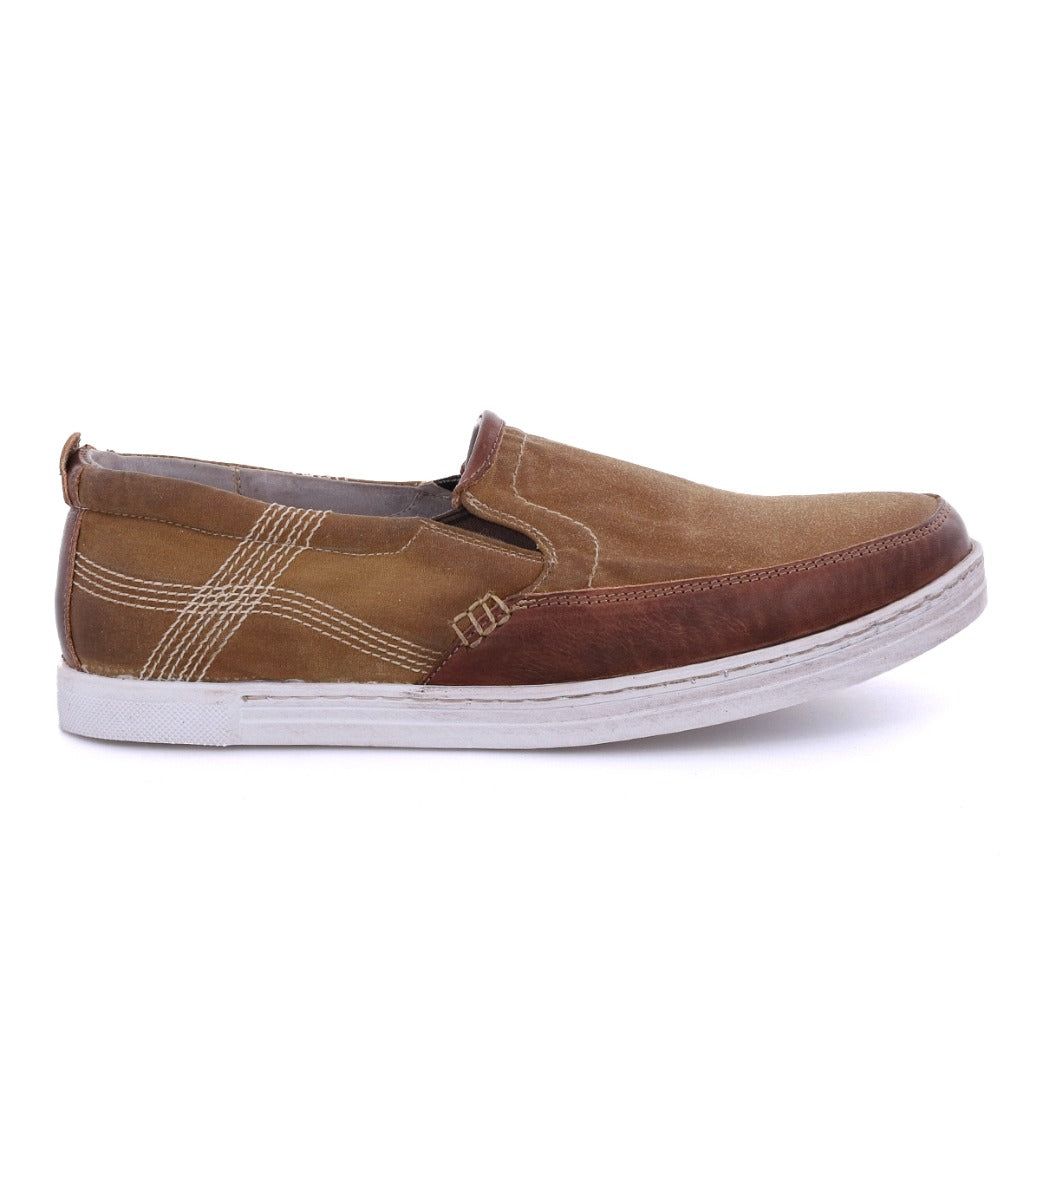 A pair of Carp men's slip on shoes in tan and brown by Bed Stu.